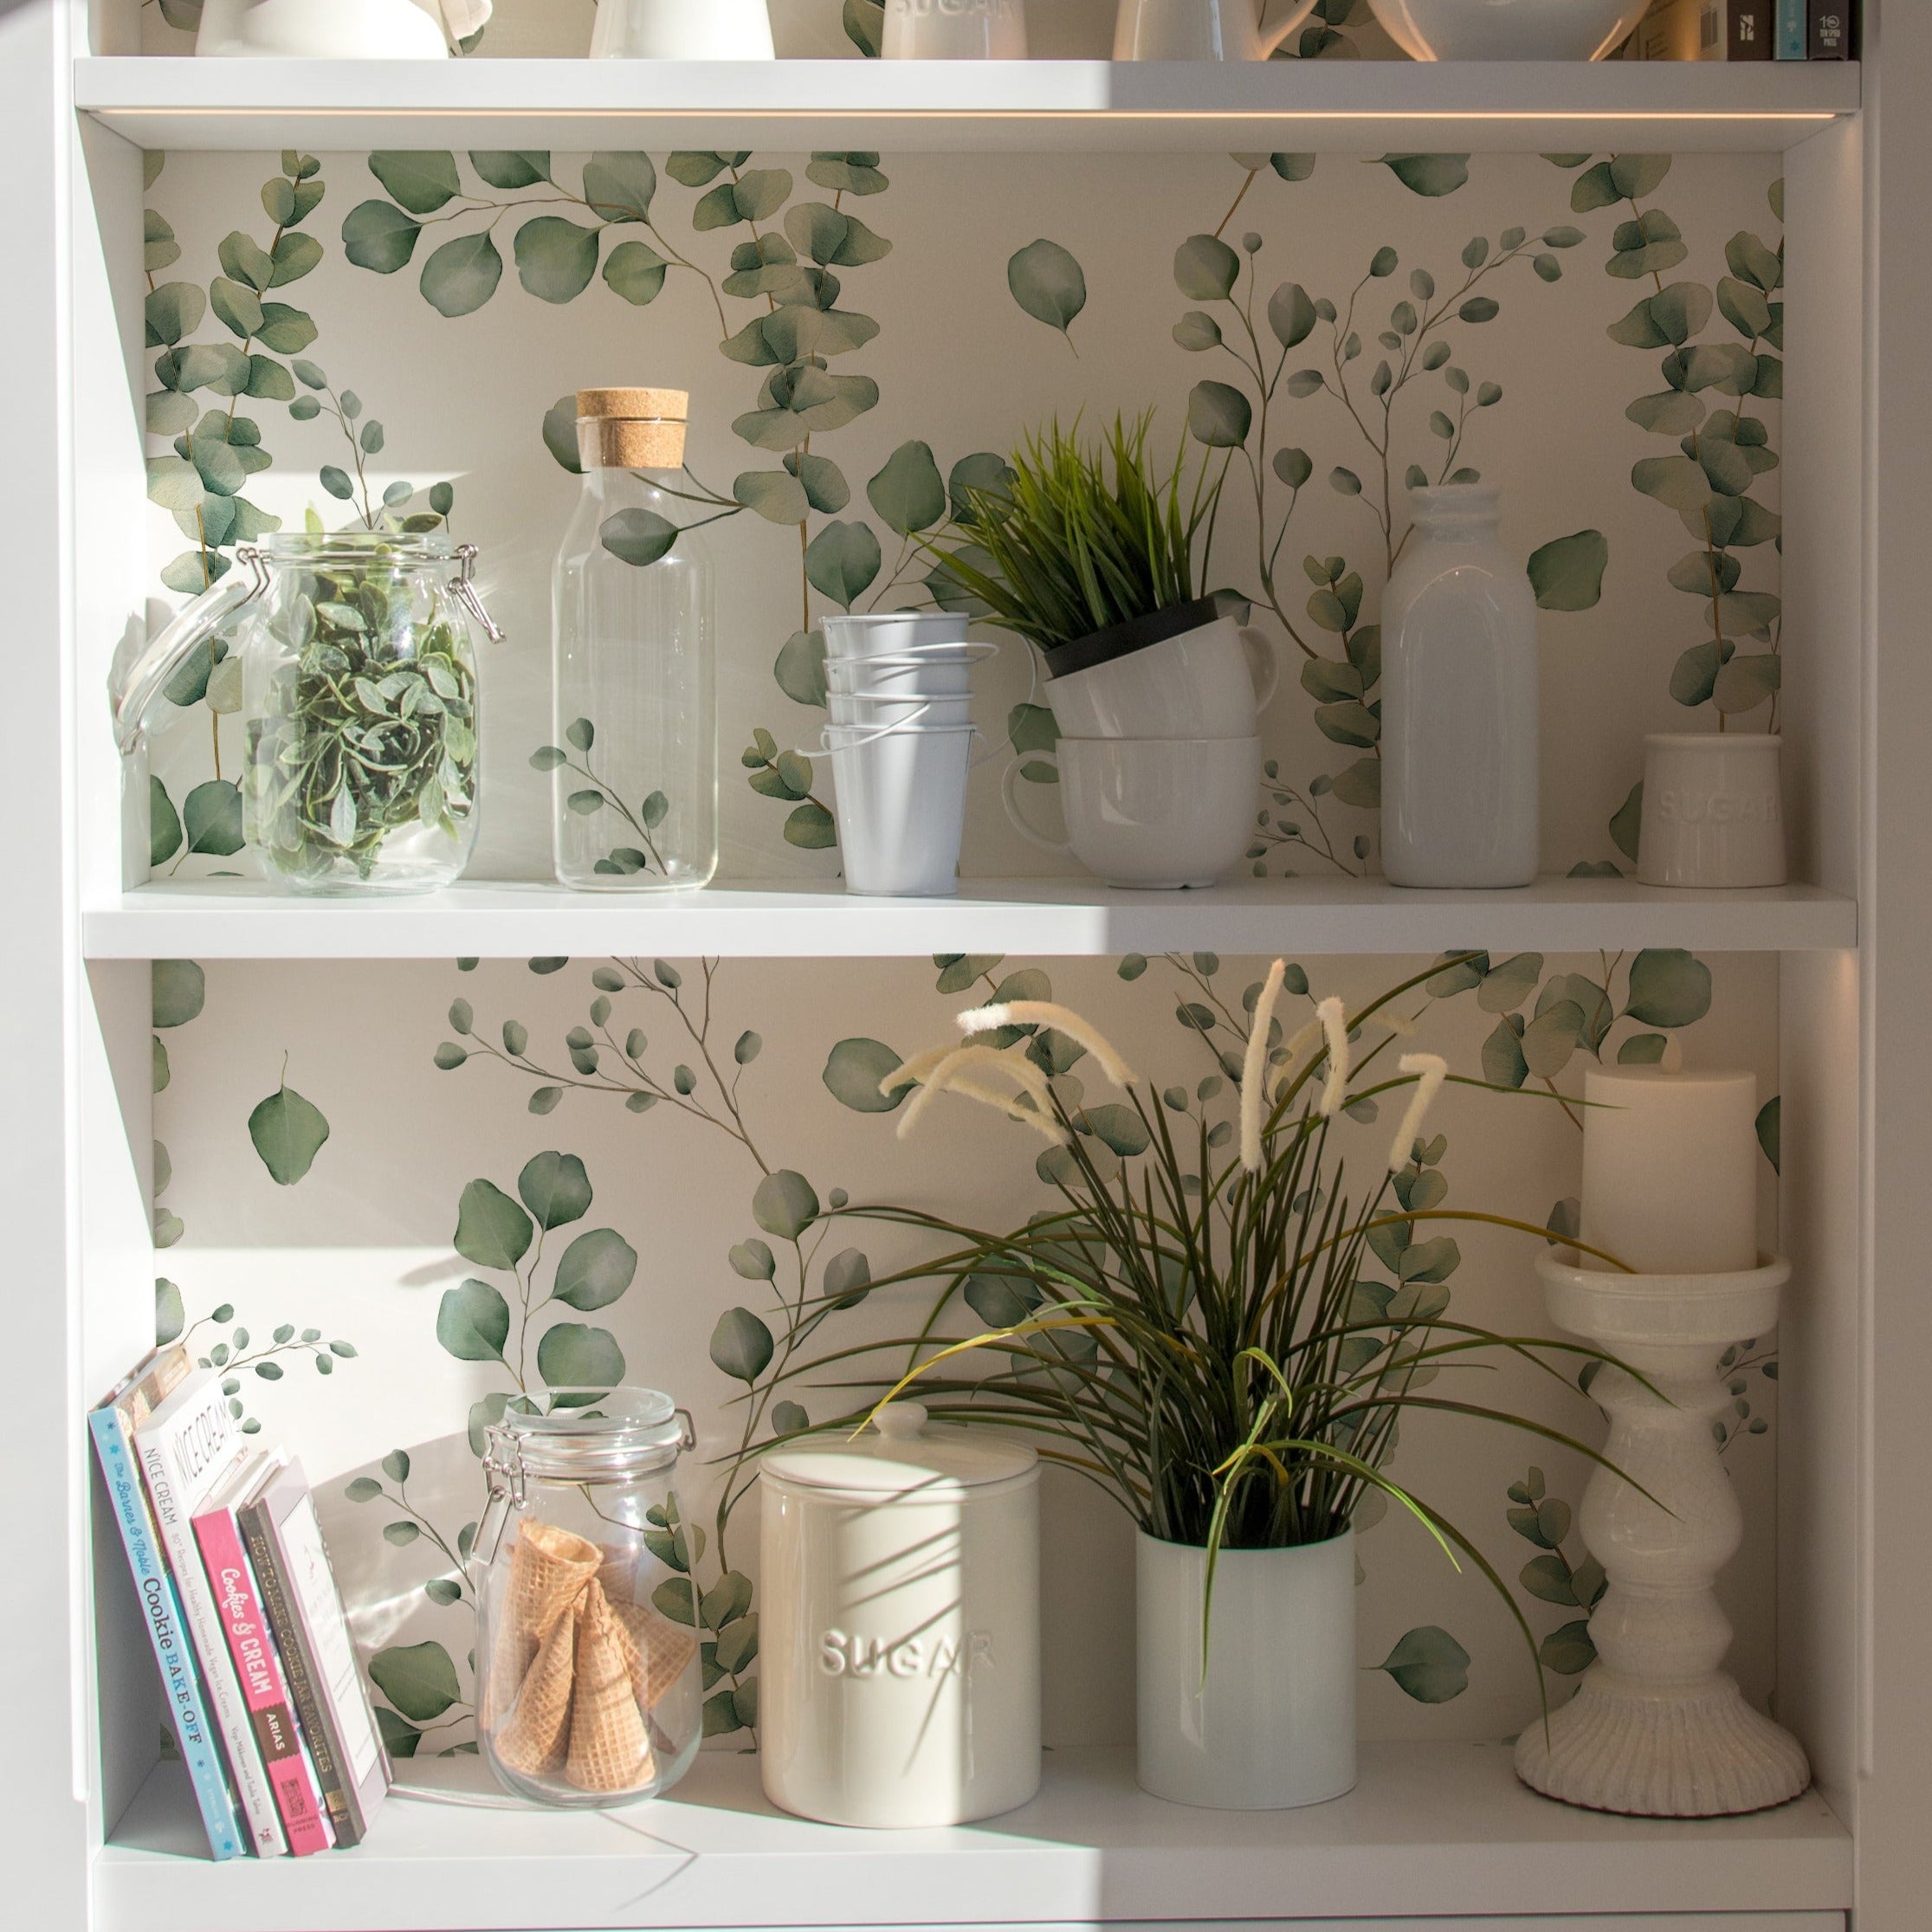 A styled interior setting showcasing shelves lined with the same eucalyptus leaf wallpaper. The shelves are decorated with items like books, white ceramic jars, and green plants, creating a cohesive, tranquil decor theme that complements the wallpaper's botanical design.